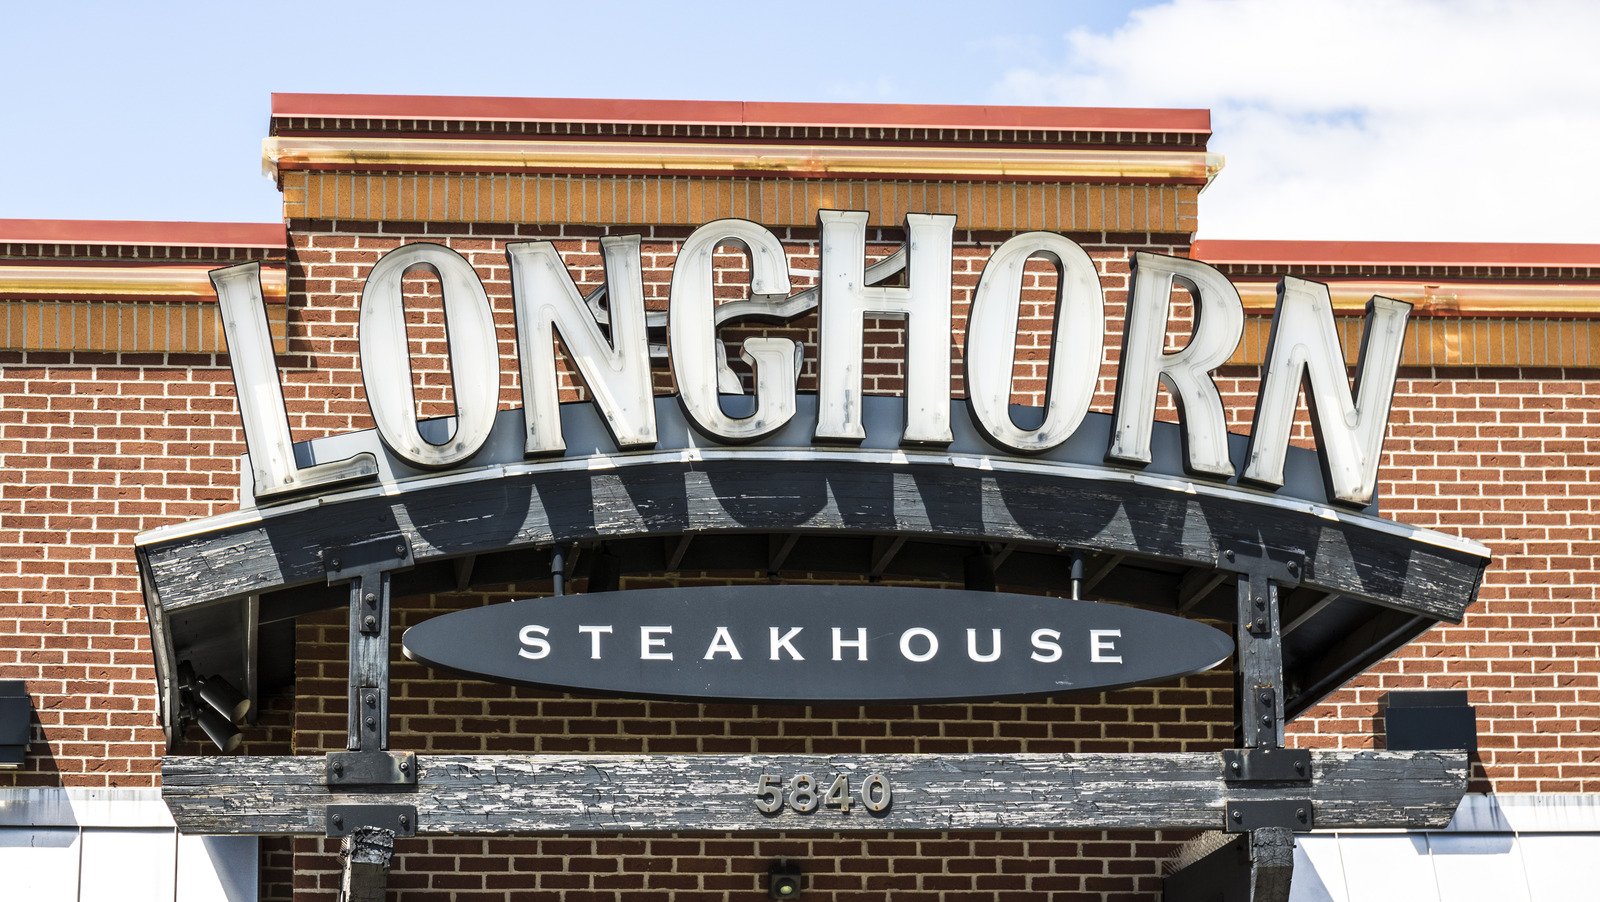 What You Should Absolutely Never Order From LongHorn Steakhouse - Mashed